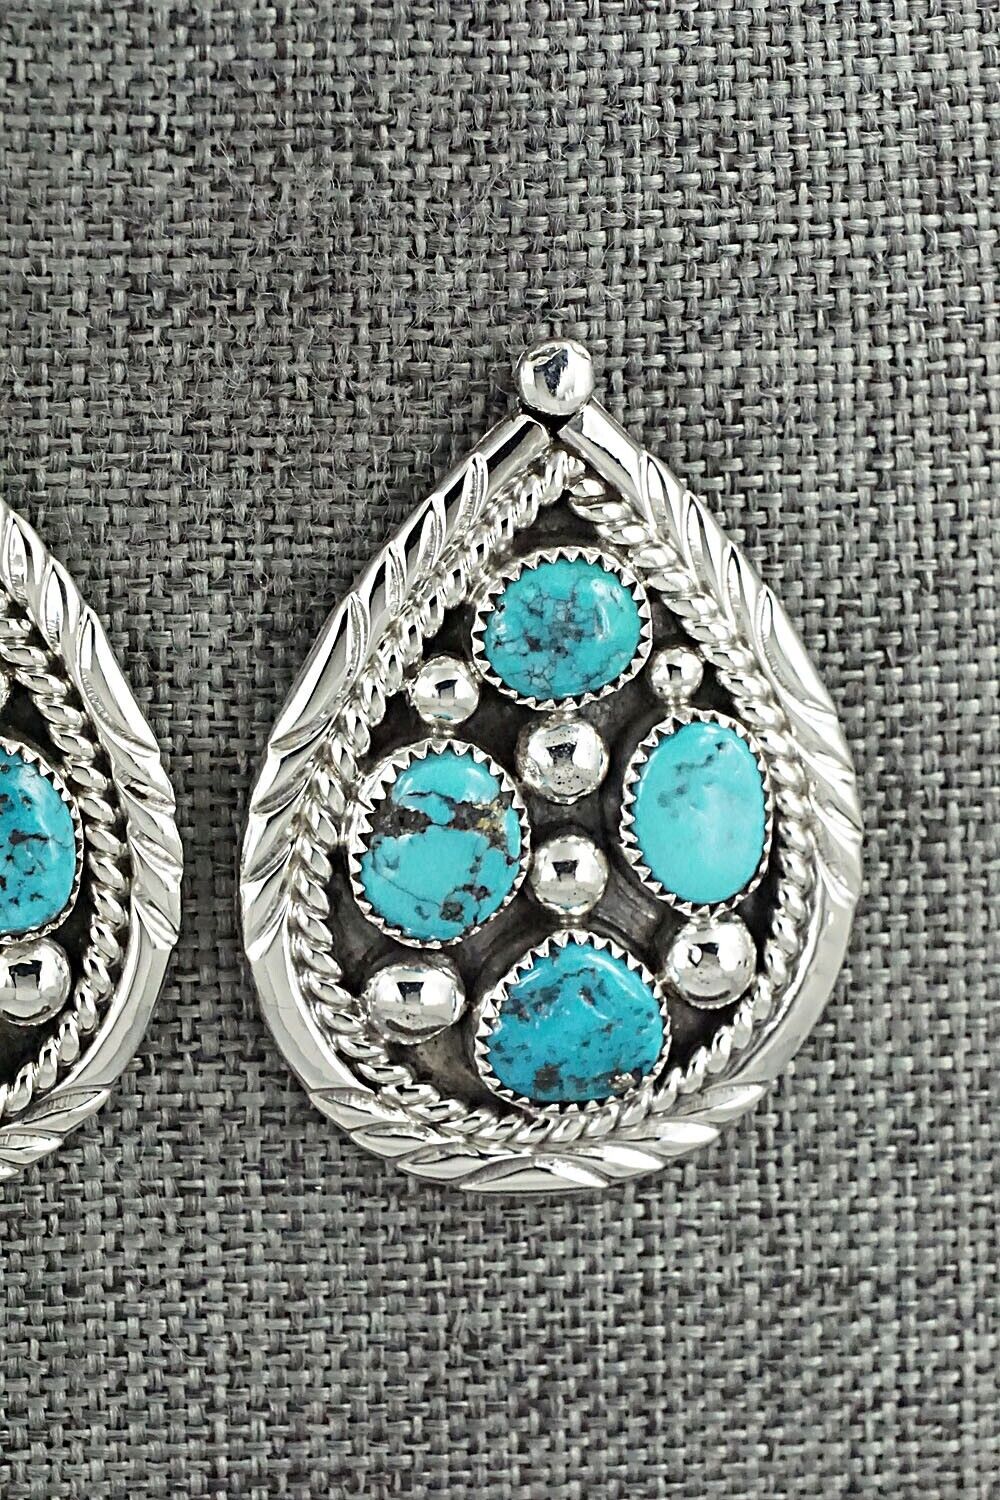 Turquoise & Sterling Silver Earrings - Chester Charley